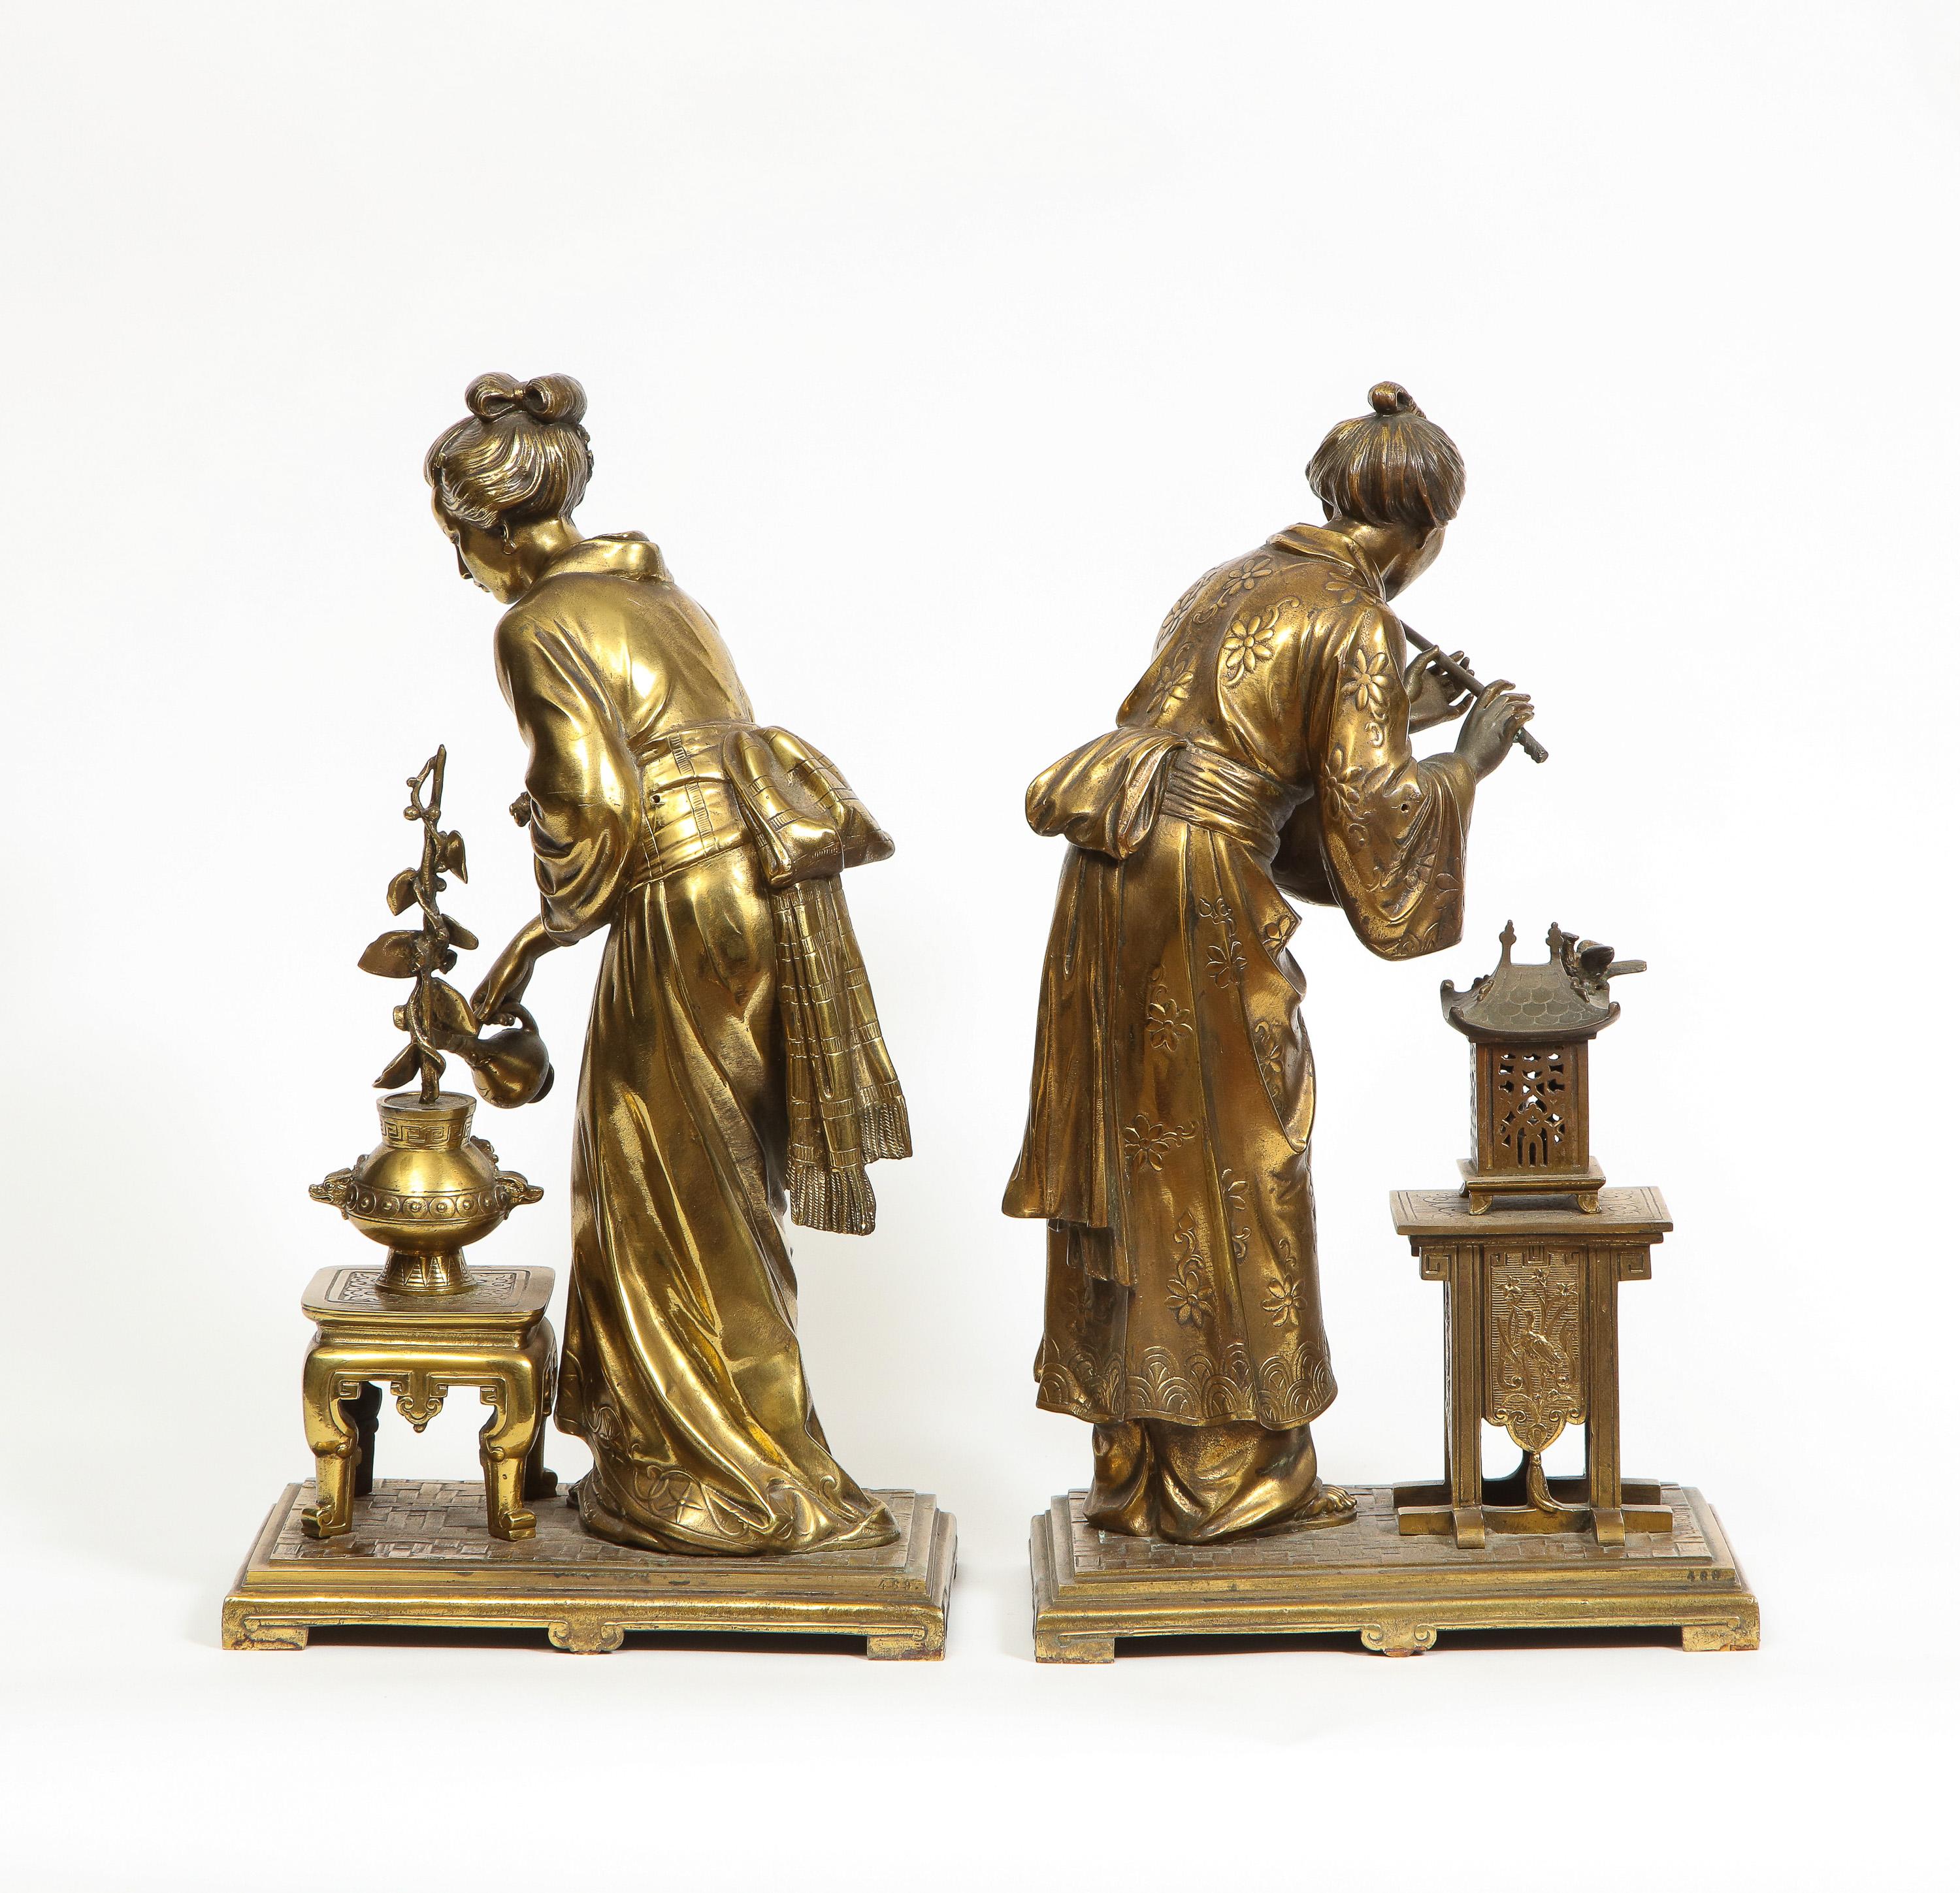 A Rare Pair of French Japonisme Bronze Sculptures by Eugene Laurent, circa 1870 10